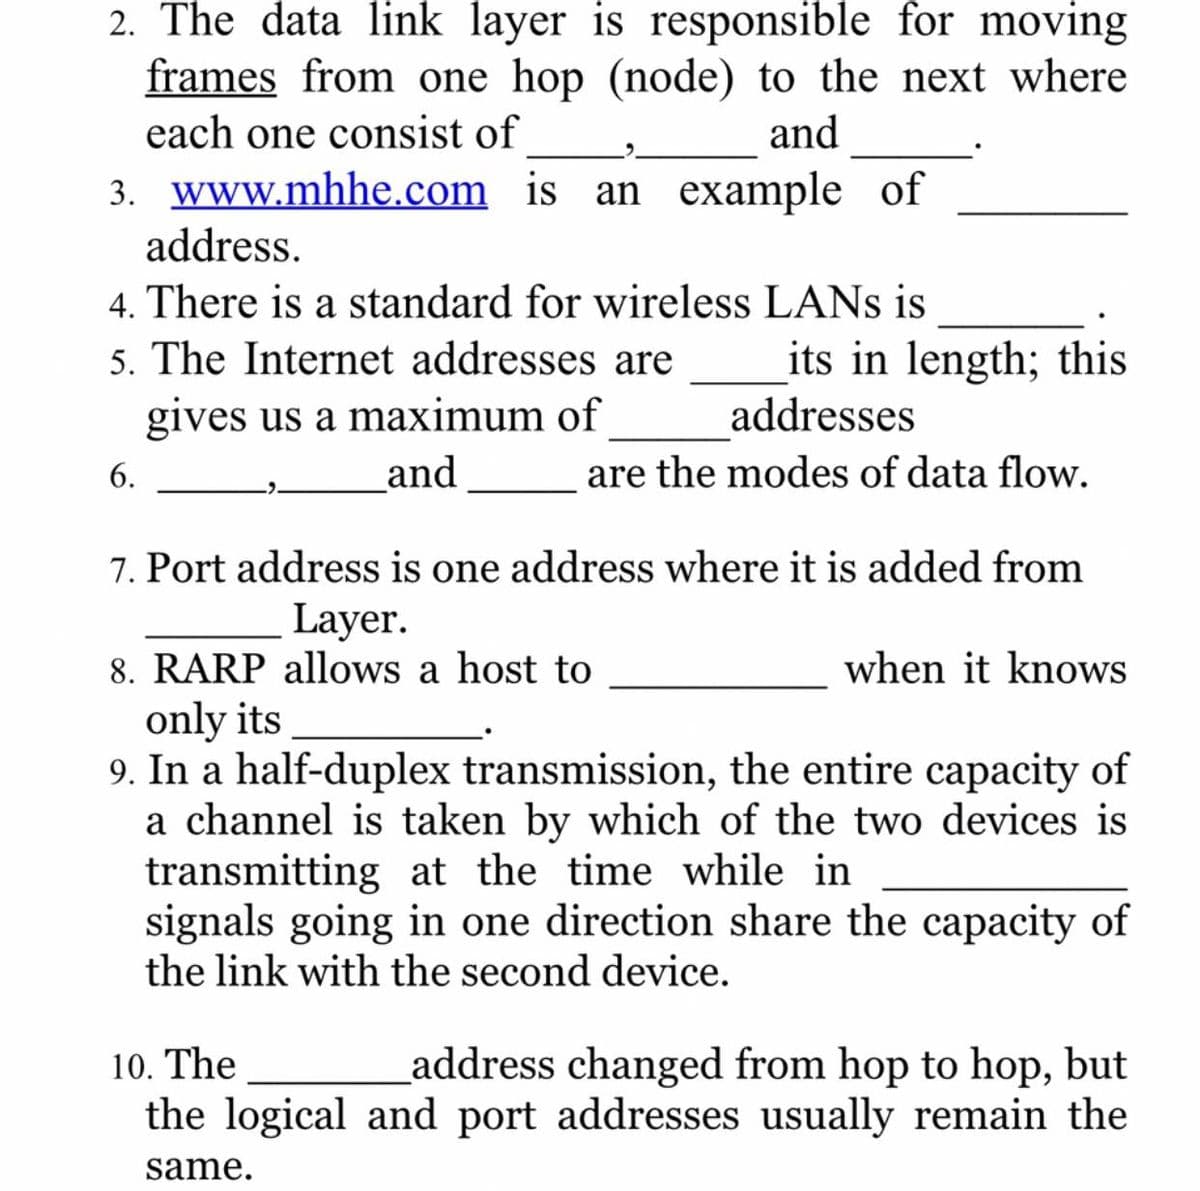 2. The data link layer is responsible for moving
frames from one hop (node) to the next where
each one consist of
and
3. www.mhhe.com is an example of
address.
4. There is a standard for wireless LANS is
5. The Internet addresses are
gives us a maximum of
its in length; this
addresses
6.
and
are the modes of data flow.
7. Port address is one address where it is added from
Layer.
8. RARP allows a host to
only its
9. In a half-duplex transmission, the entire capacity of
a channel is taken by which of the two devices is
transmitting at the time while in
signals going in one direction share the capacity of
the link with the second device.
when it knows
10. The
address changed from hop to hop, but
the logical and port addresses usually remain the
same.
